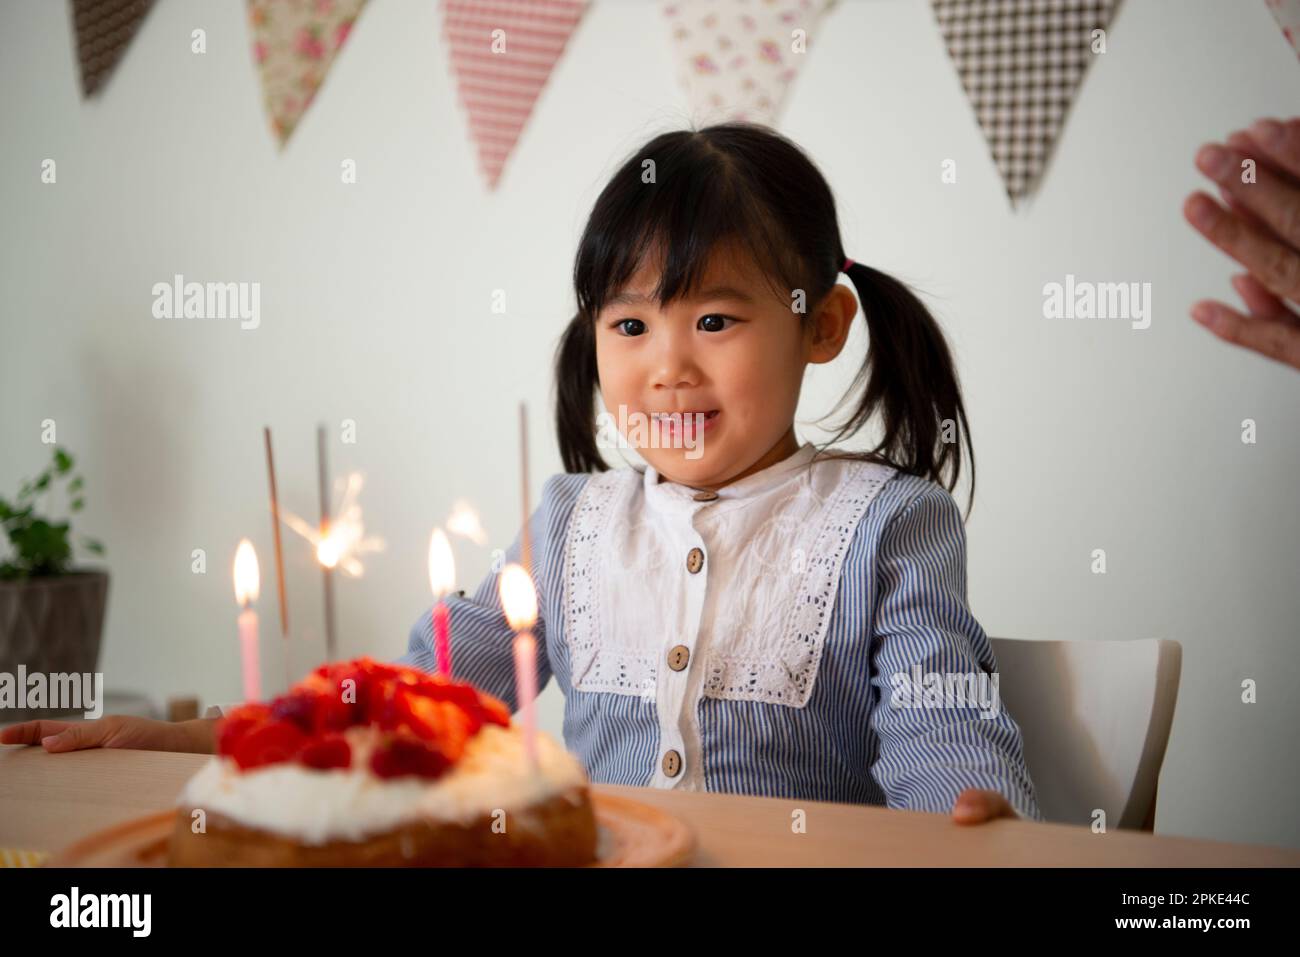 Girl in front of the cake Stock Photo